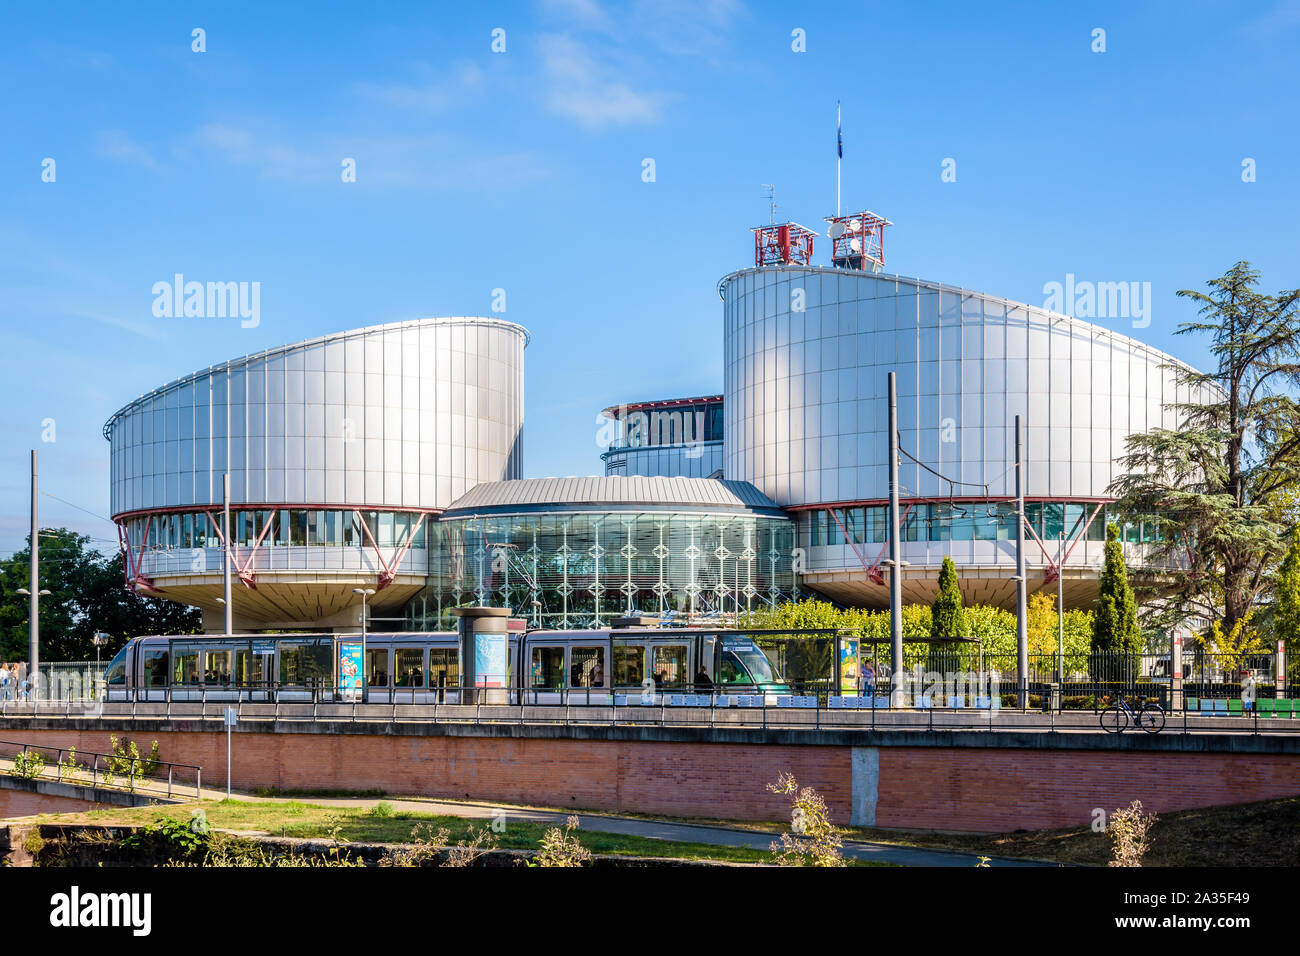 A tram is stopping at the 'Droits de l'Homme' tramway station in front of the building of the European Court of Human Rights in Strasbourg, France. Stock Photo